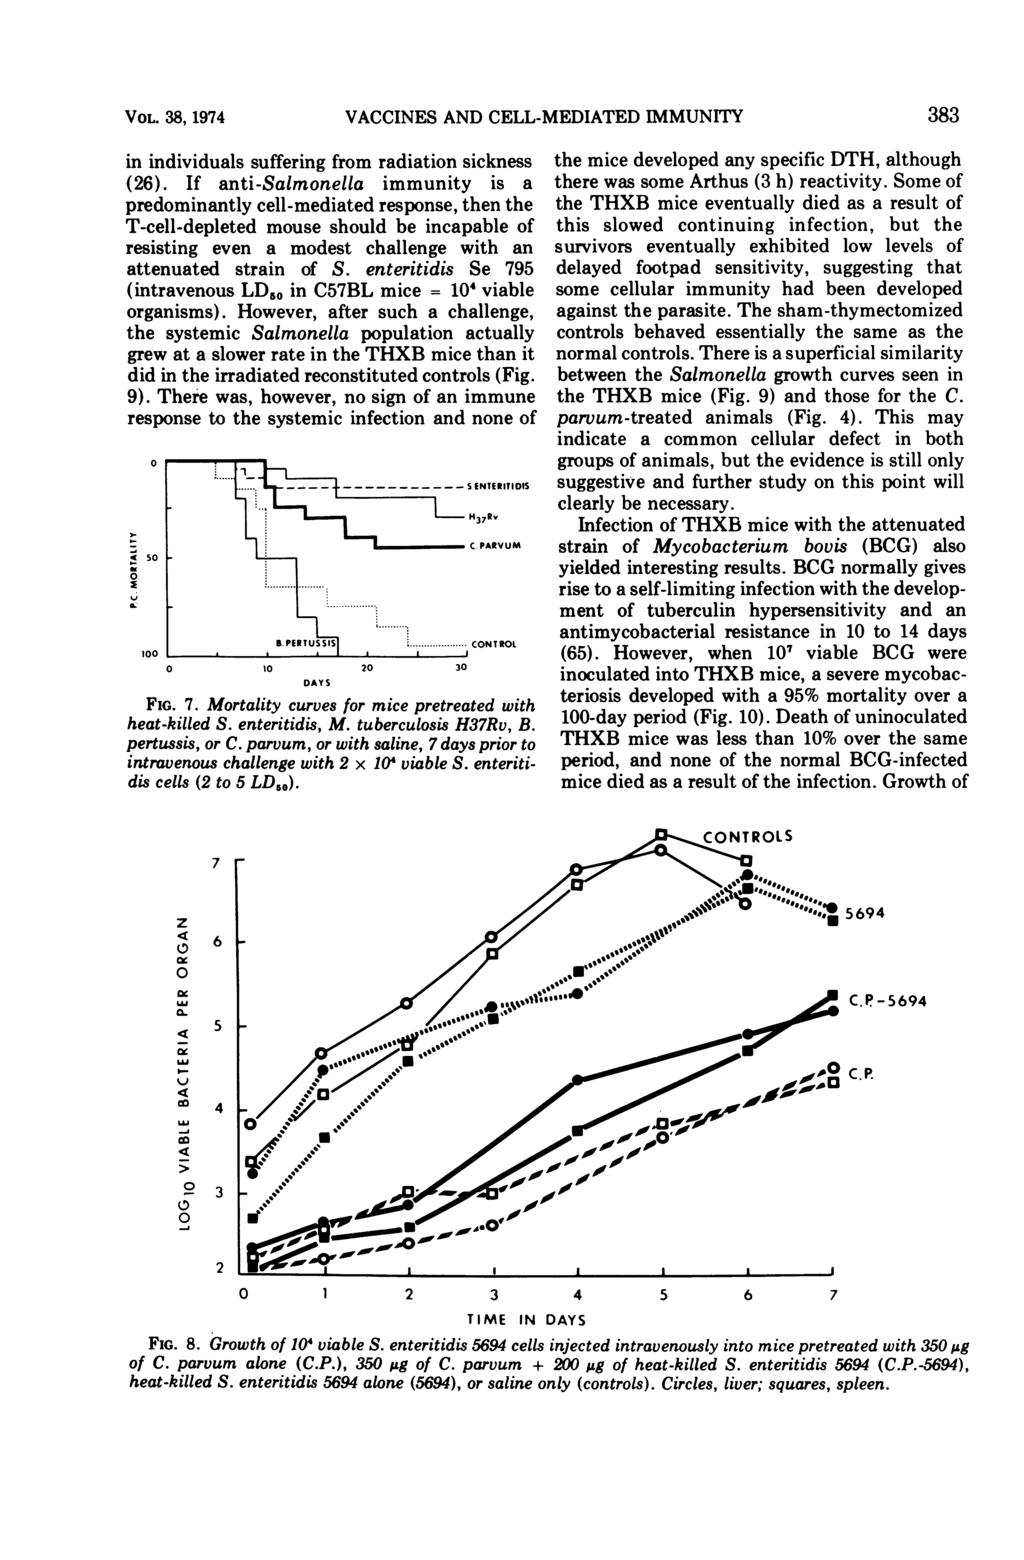 VOL. 38,1974 VACCINES AND CELL- -1MEDIATED IMMUNITY 383 in individuals suffering from radiation sickness (26).